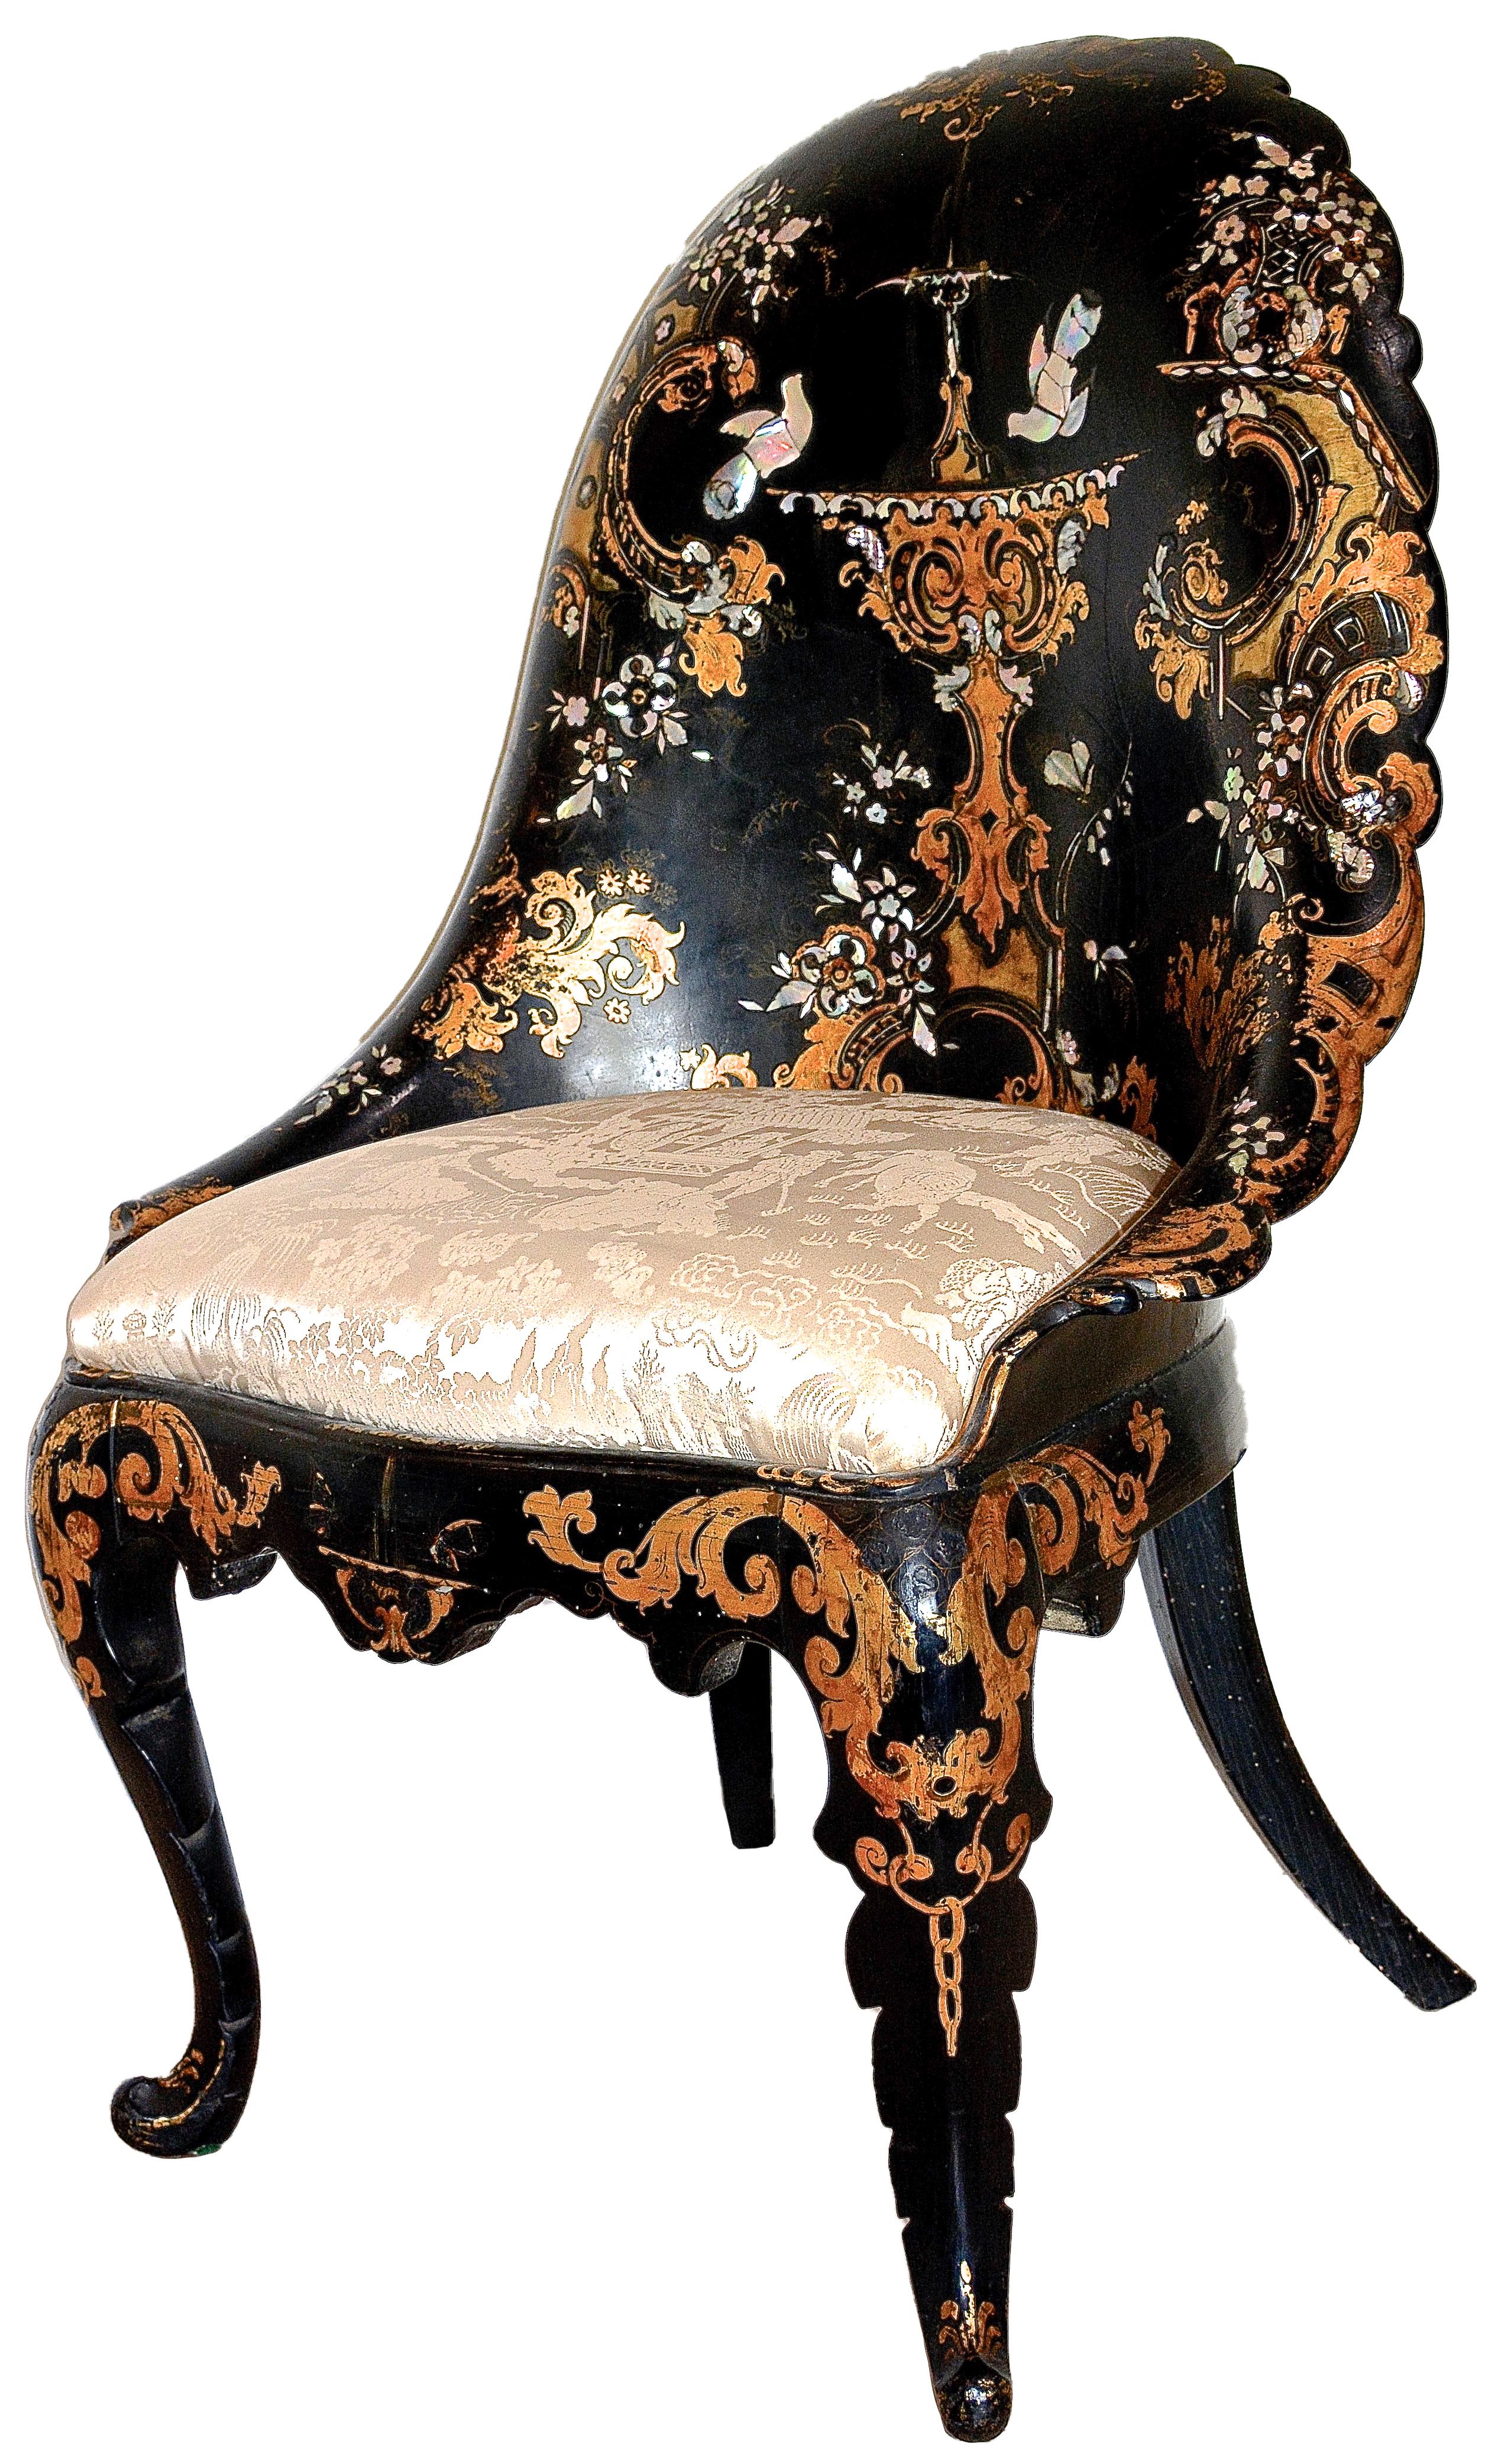 19th Century Victorian Inlaid Mother-of-Pearl & Gilt Papier Mache Chair For Sale 6